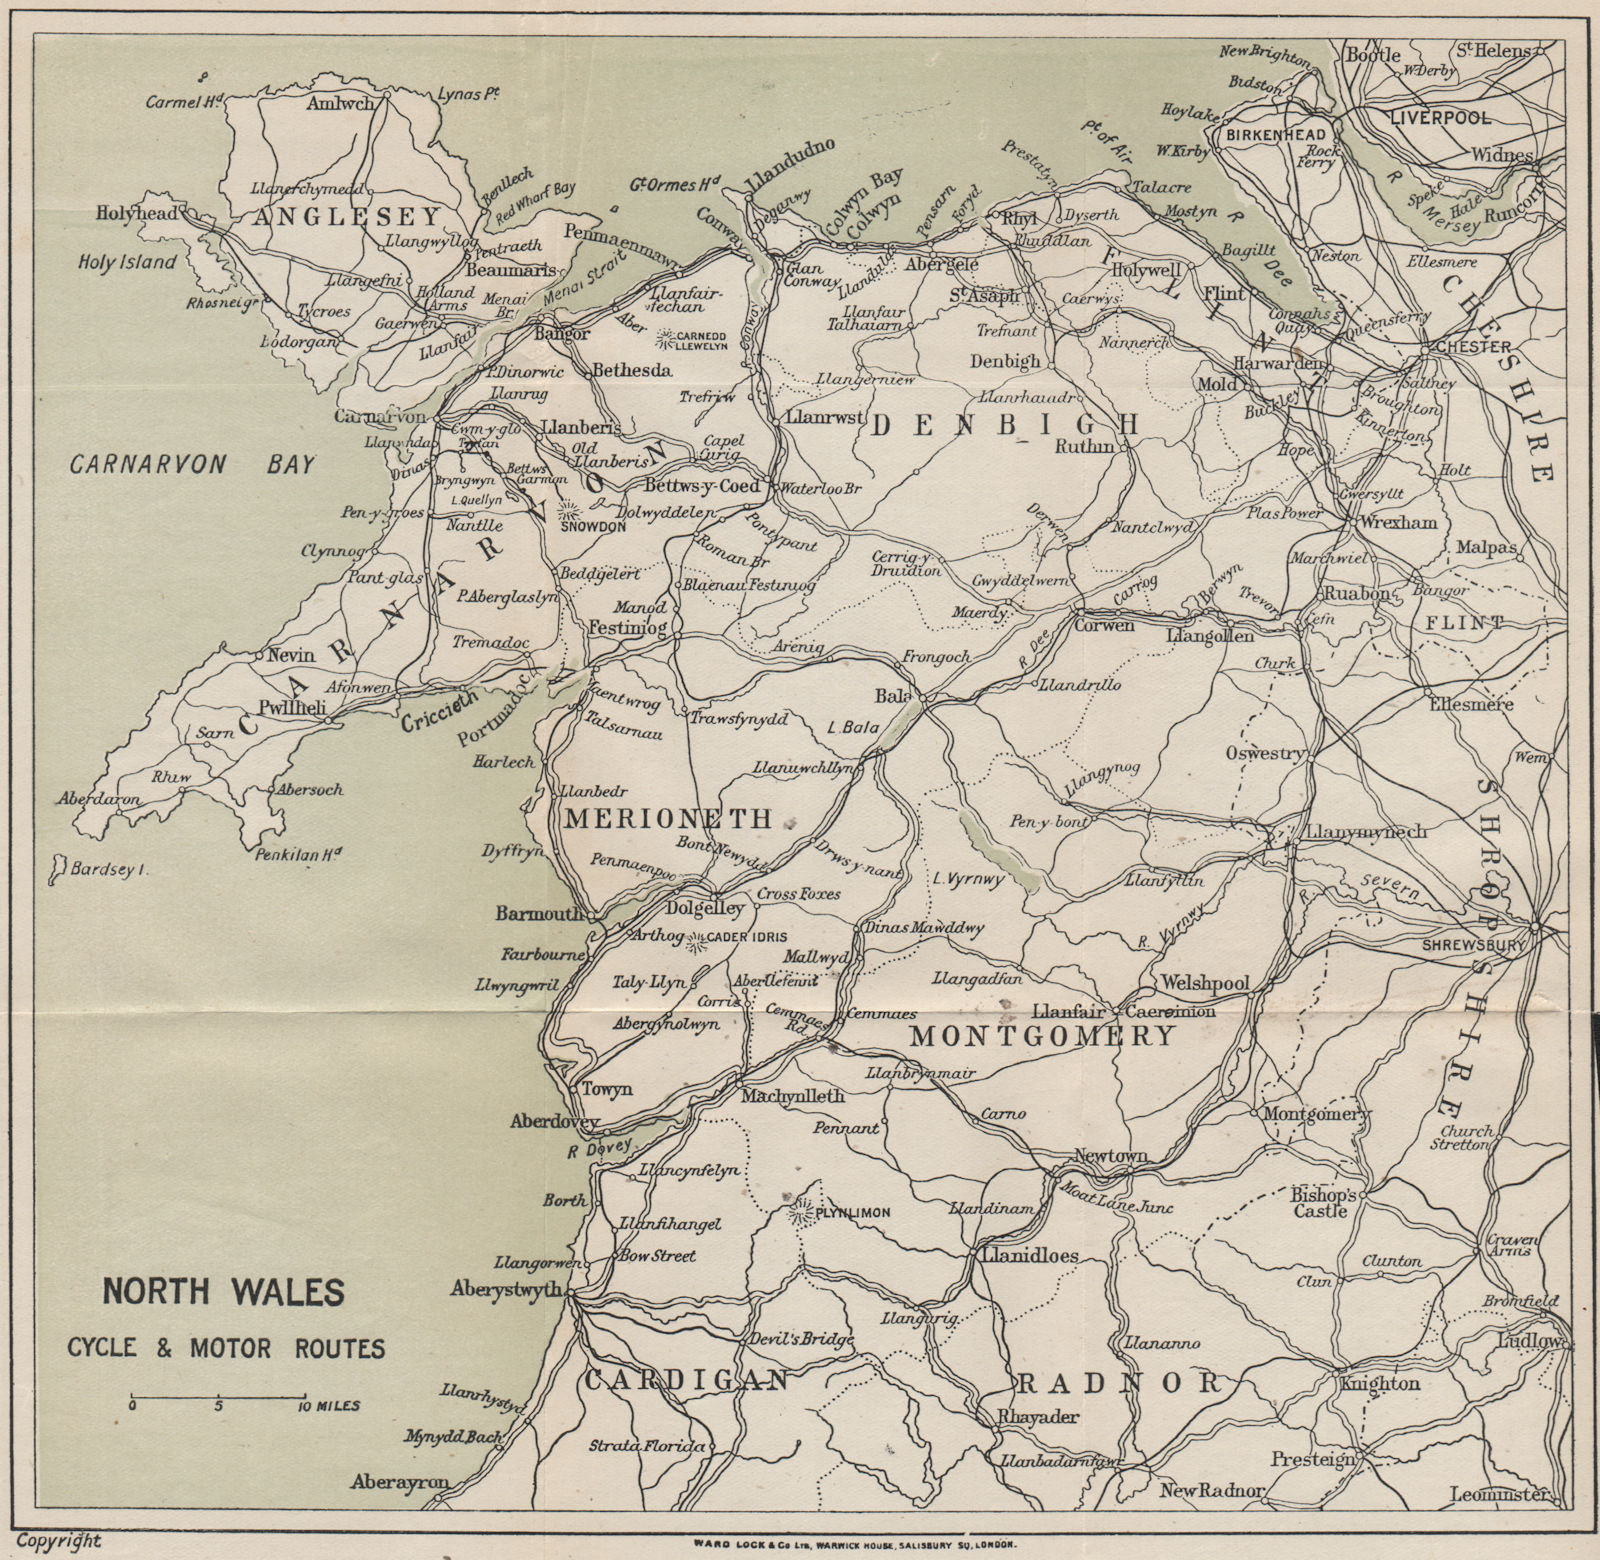 Associate Product NORTH WALES CYCLE & MOTOR ROUTES. Railways. WARD LOCK 1913 old antique map